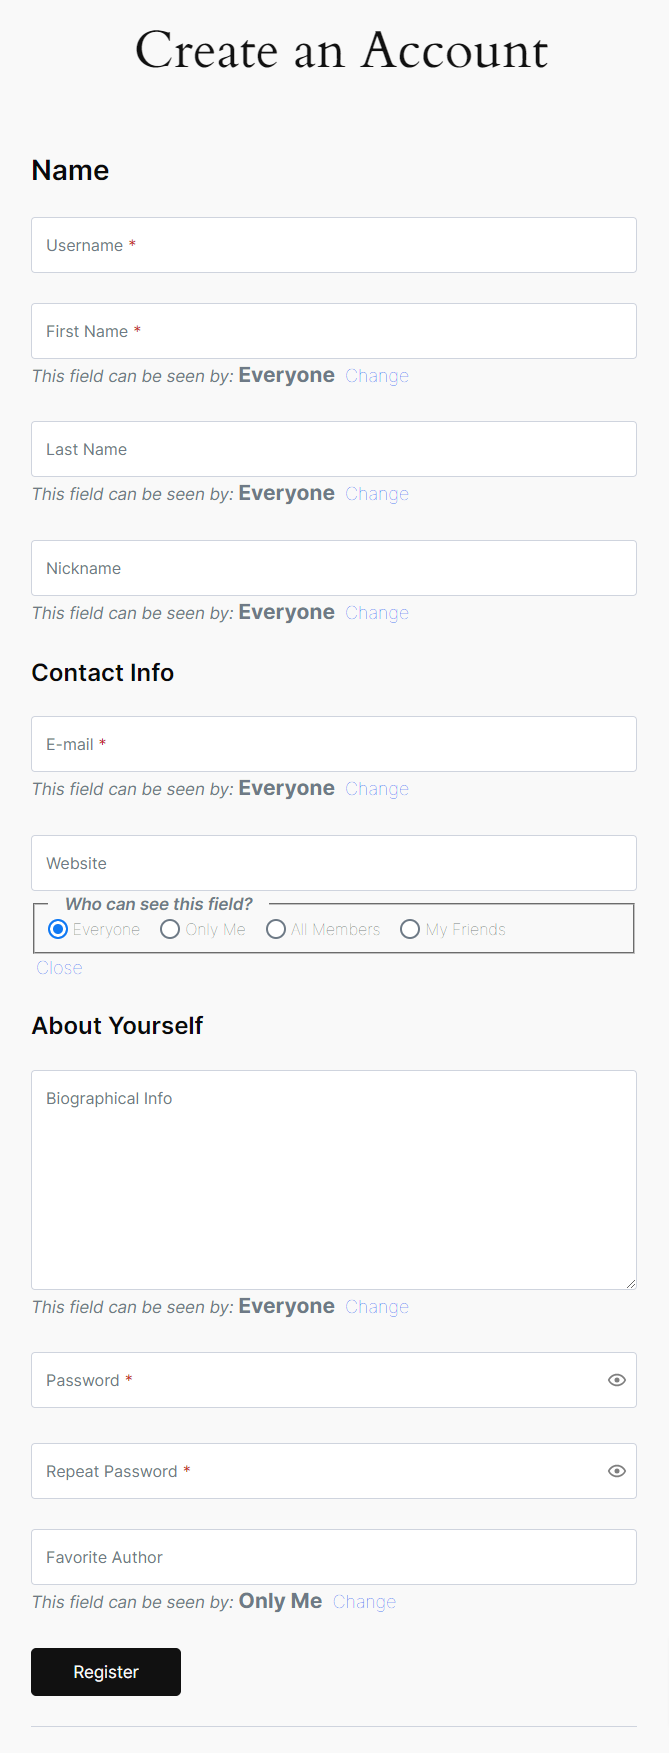 Profile Builder Pro - BuddyPress - Field Visibility Options - Frontend